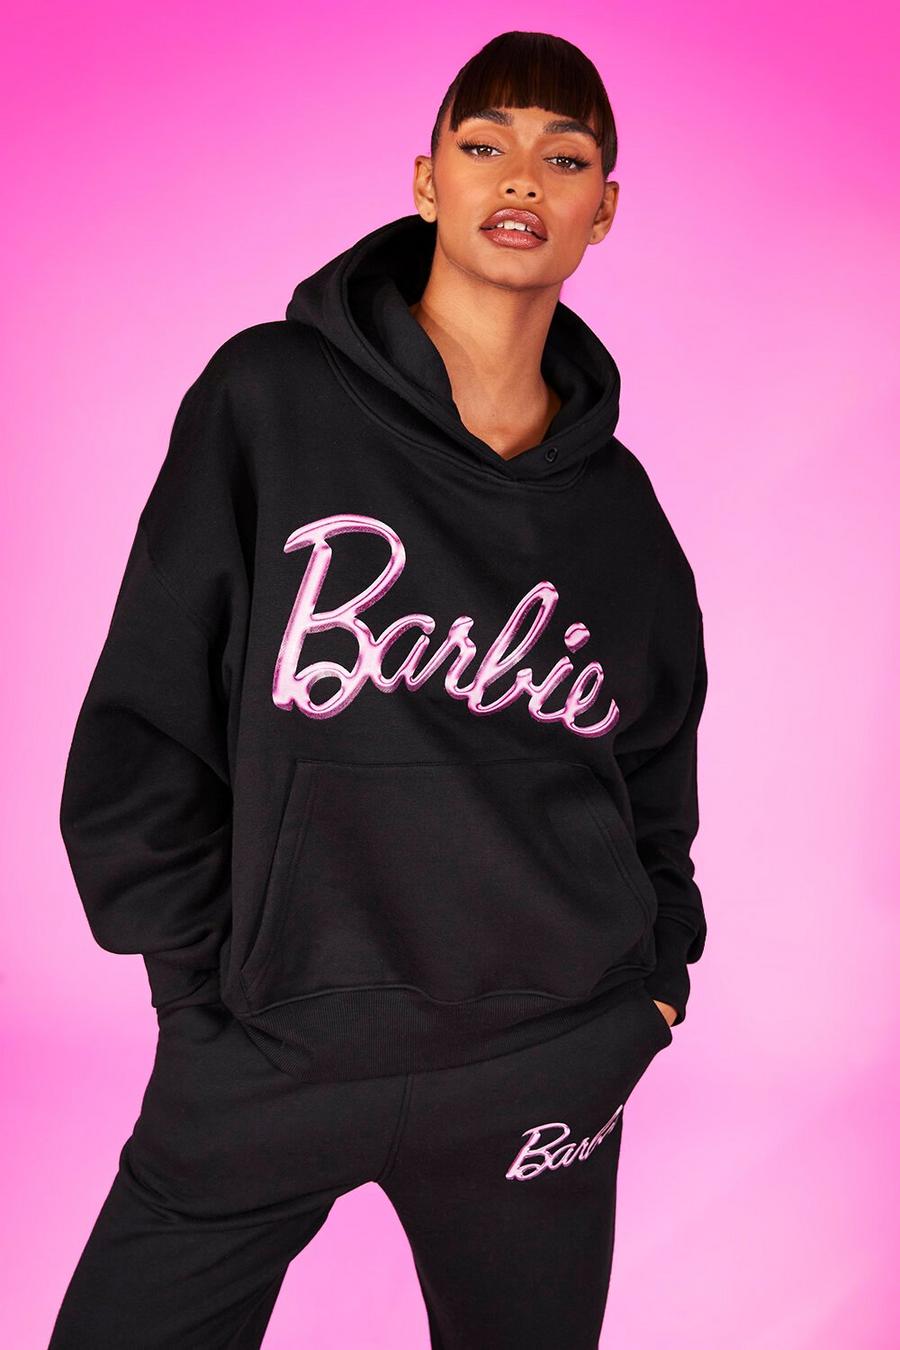 Boohoo - Barbie Printed Tote Bag - neon-pink - Size One Size